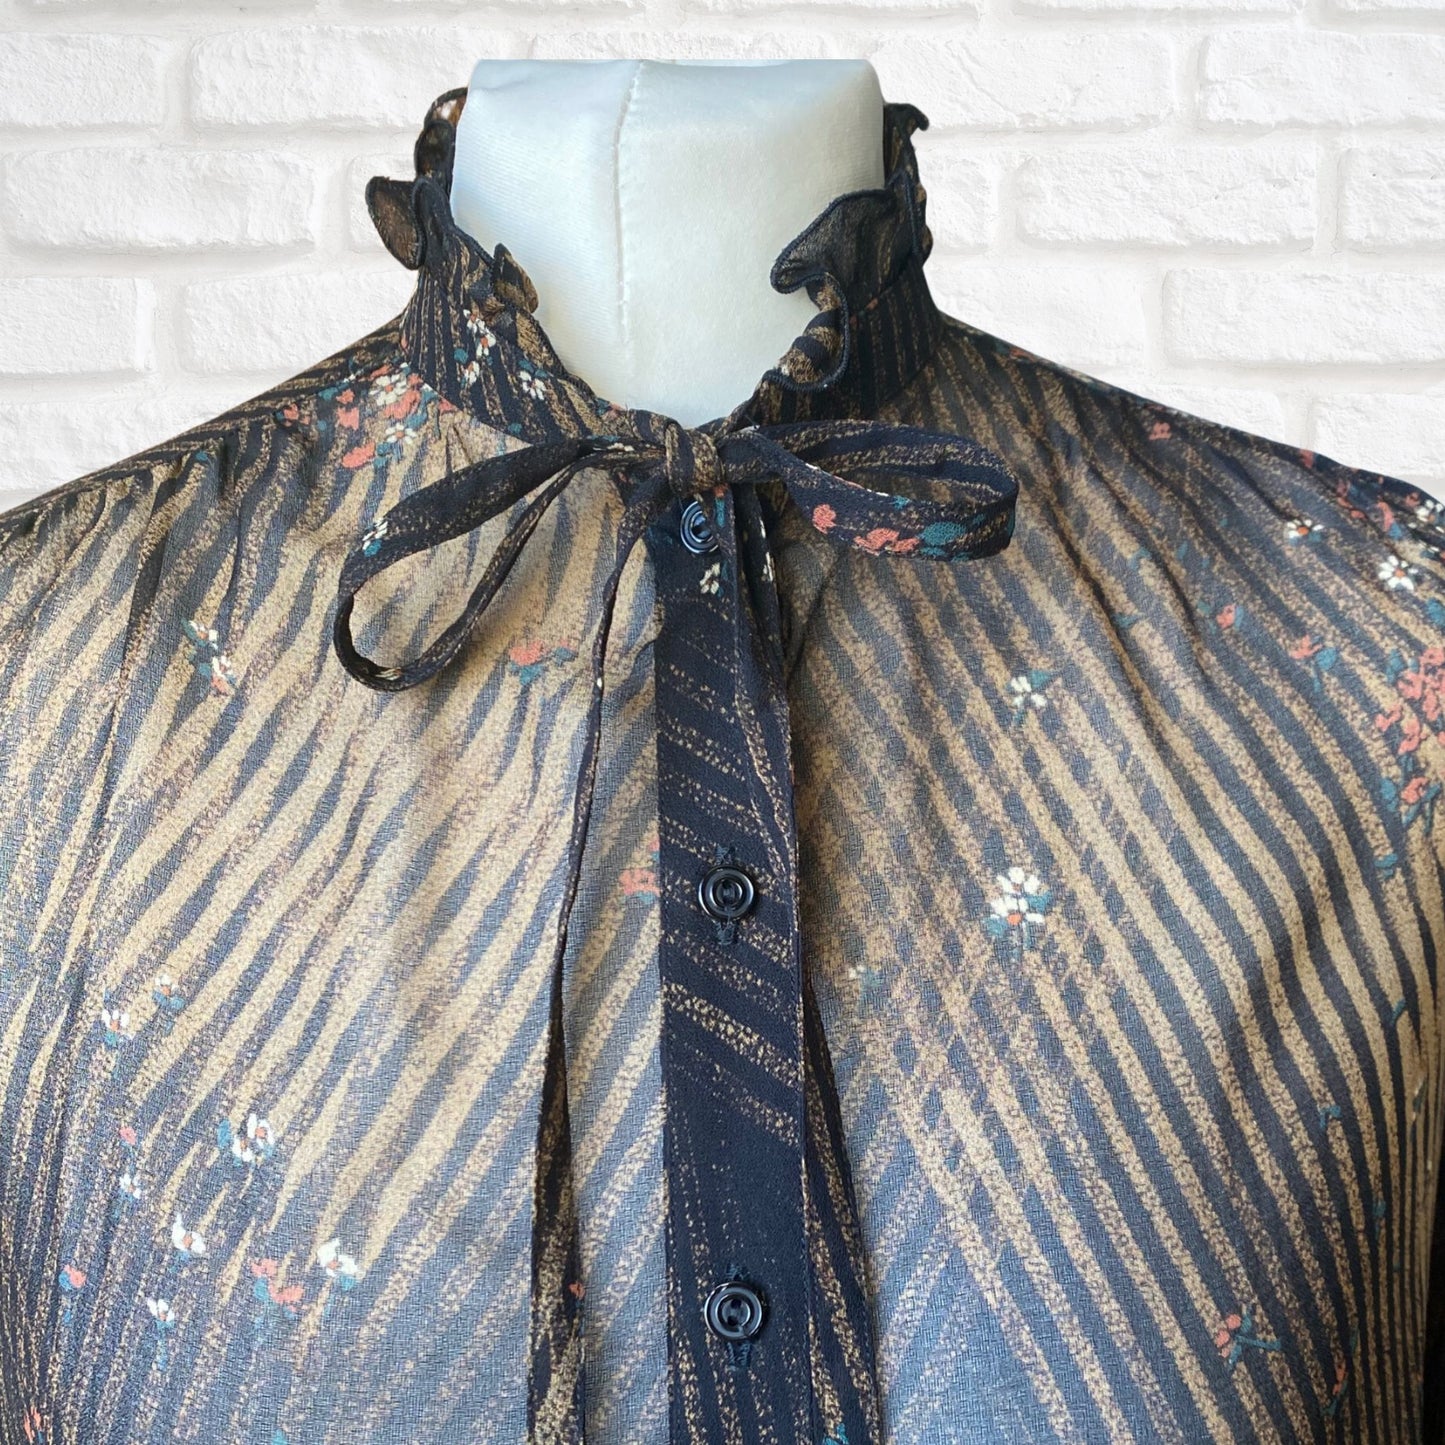 Vintage 80s Semi Sheer Black Floral and Striped Frill Neck Blouse.Approx UK size 10-14